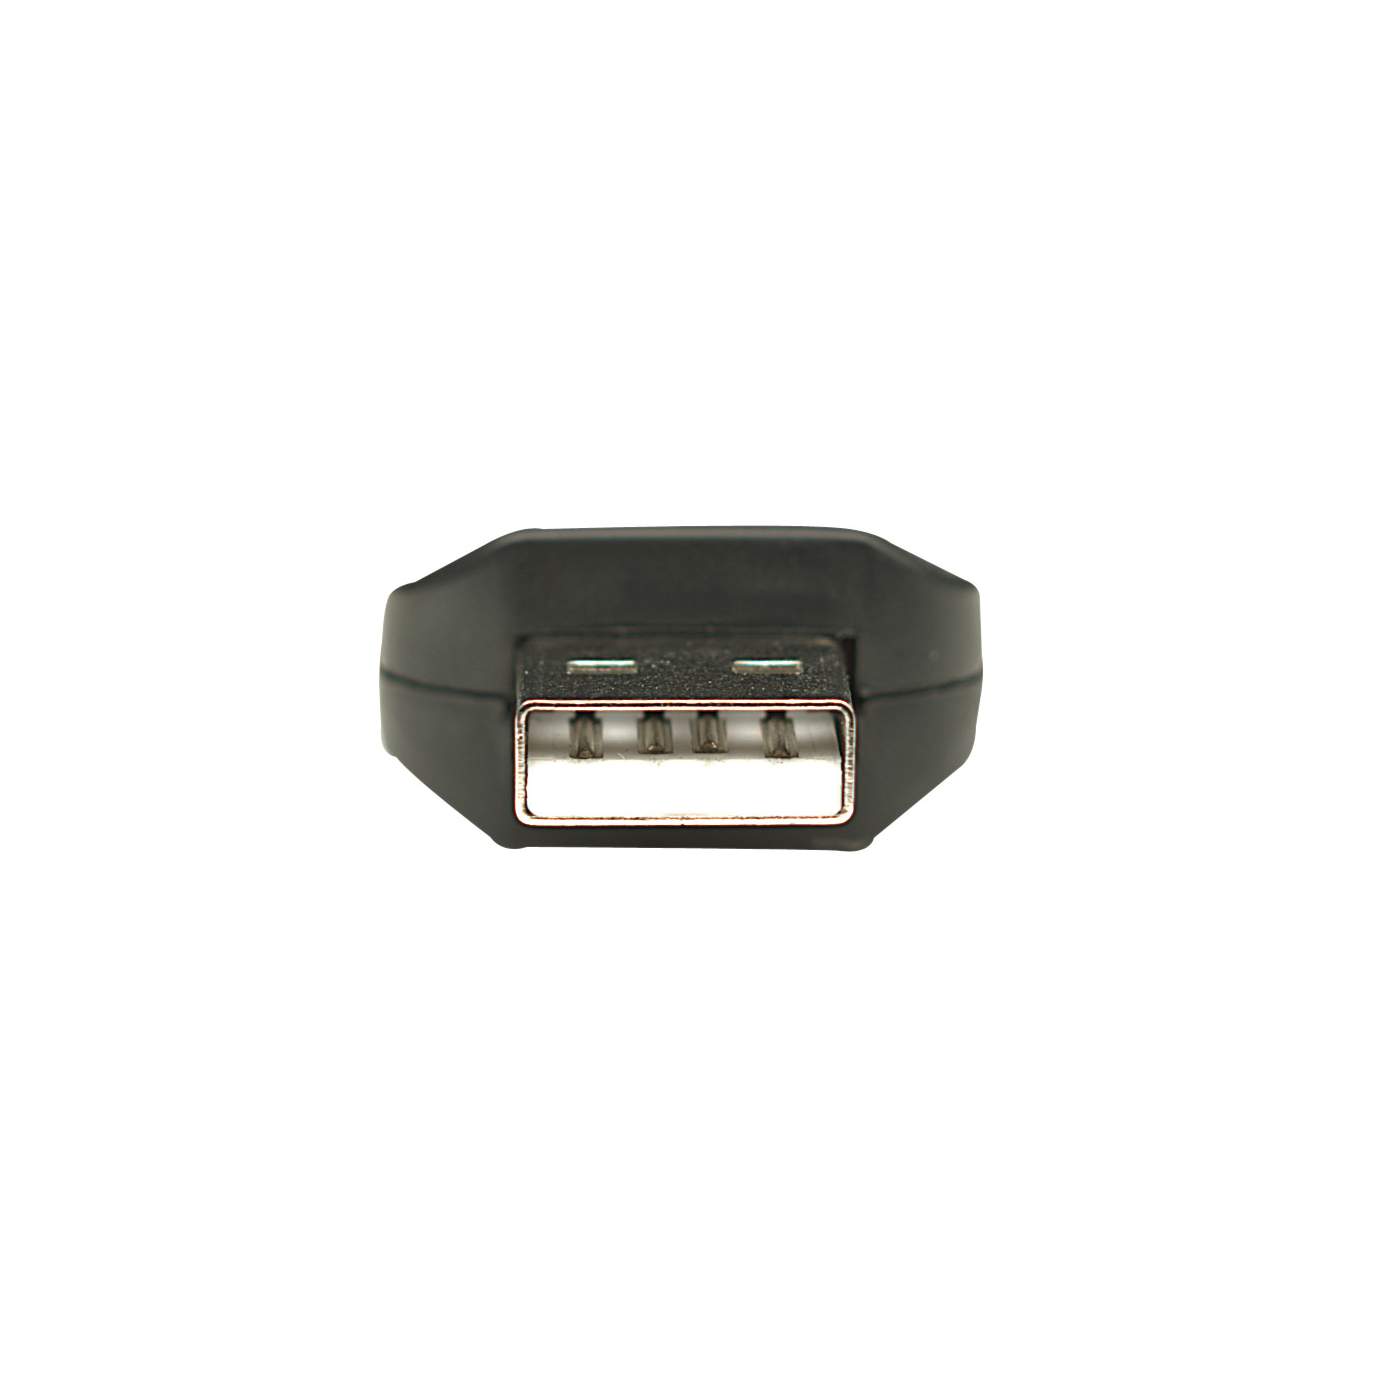 USB-A to 3.5 mm Audio Adapter Image 7